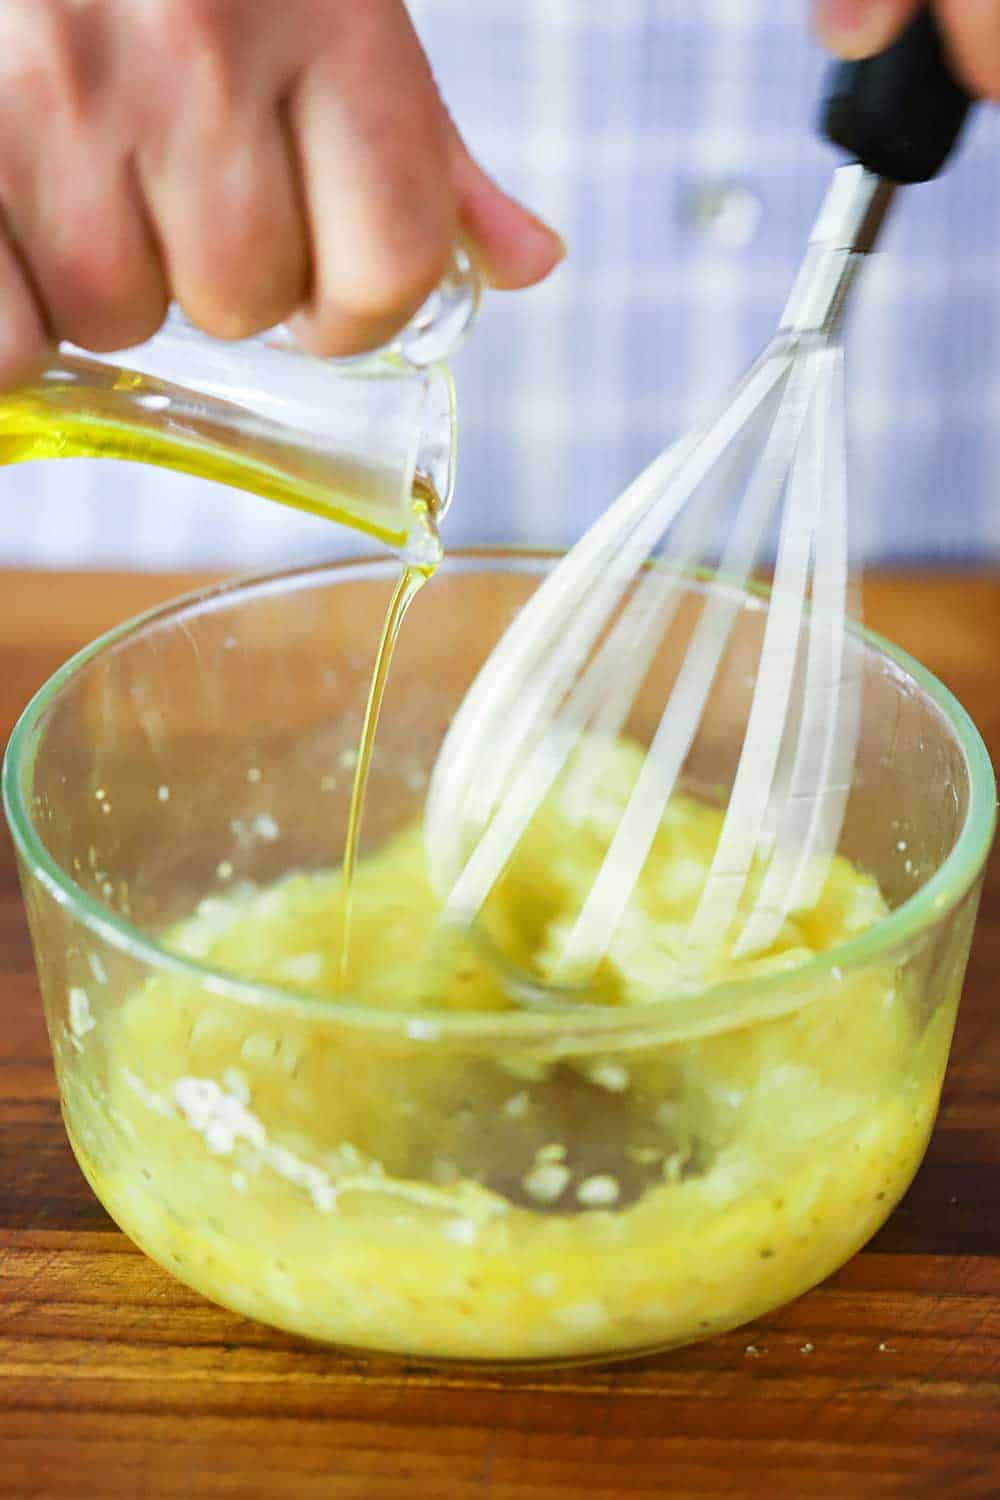 A hand pouring olive oil from a glass vessel into a glass bowl filled with lemon vinaigrette with a whisk in it.